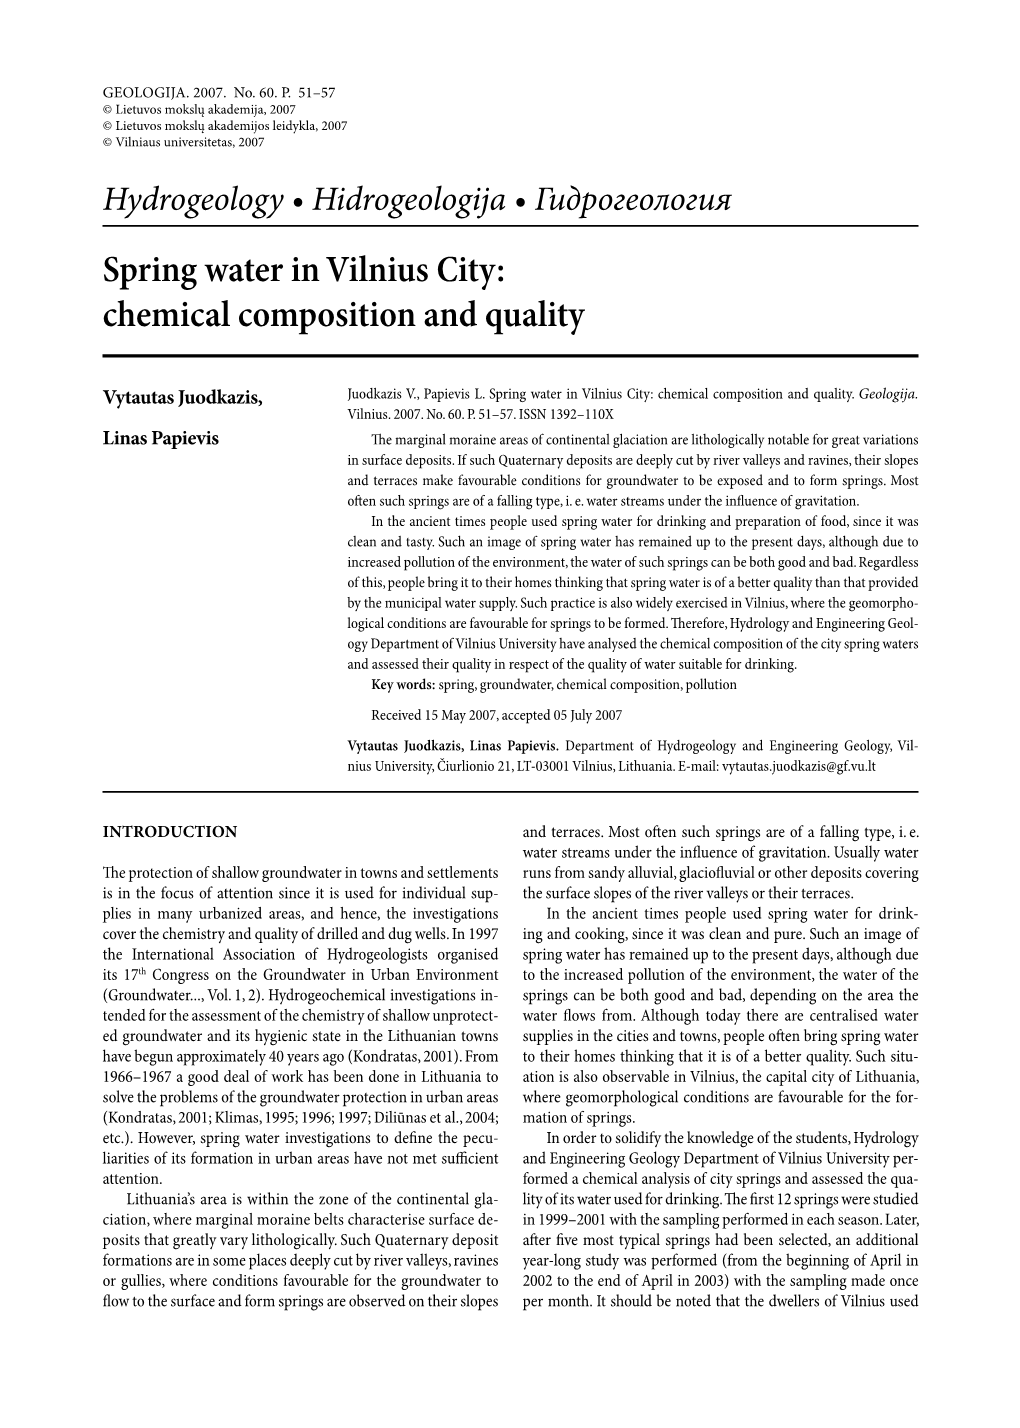 Spring Water in Vilnius City: Chemical Composition and Quality